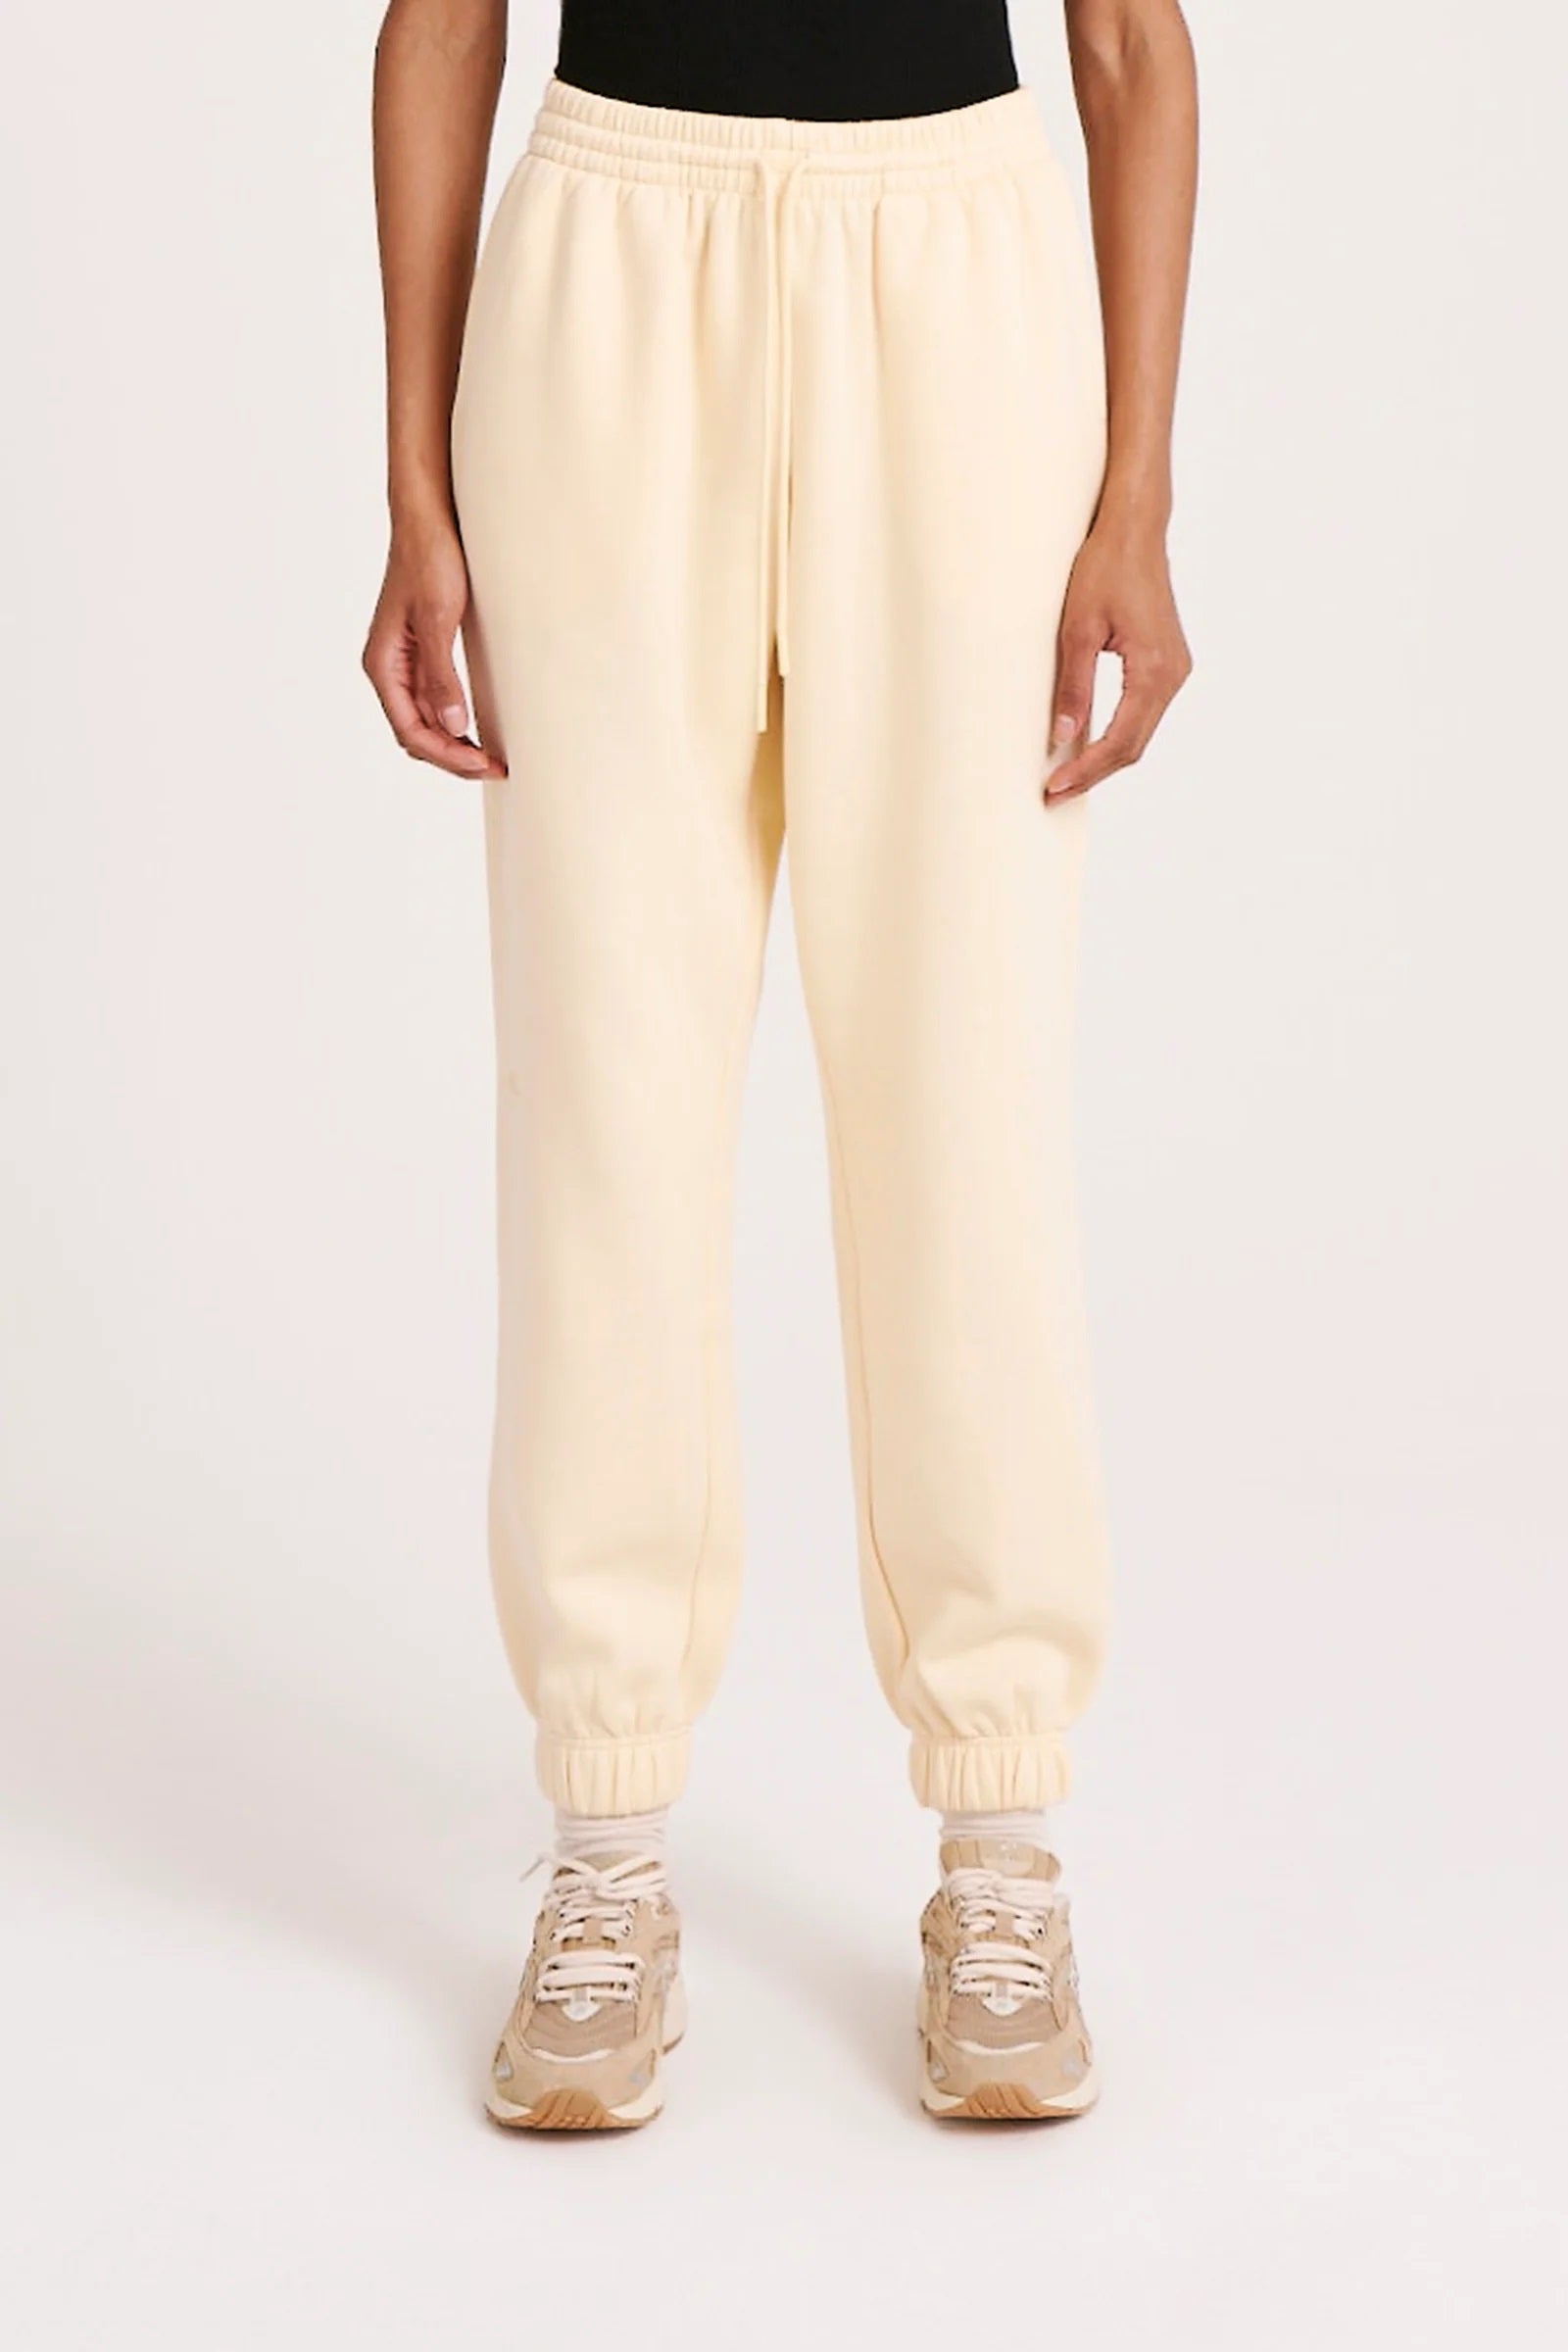 Nude Lucy Carter Curated Trackpant Custard